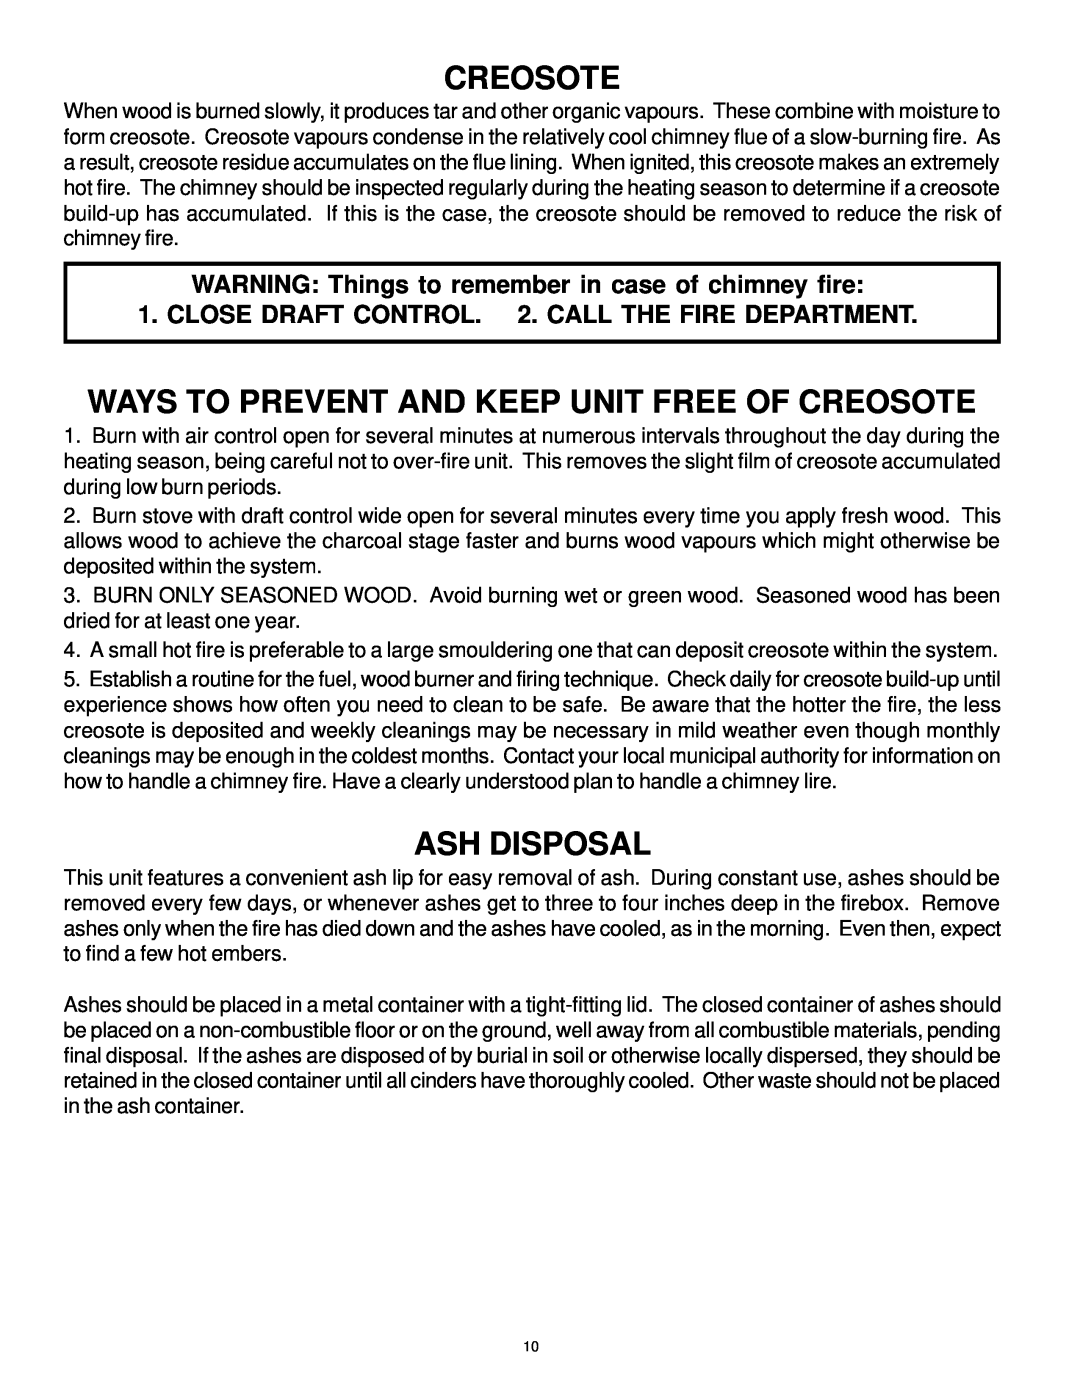 Vermont Casting WOOD STOVE owner manual Ways To Prevent And Keep Unit Free Of Creosote, Ash Disposal 